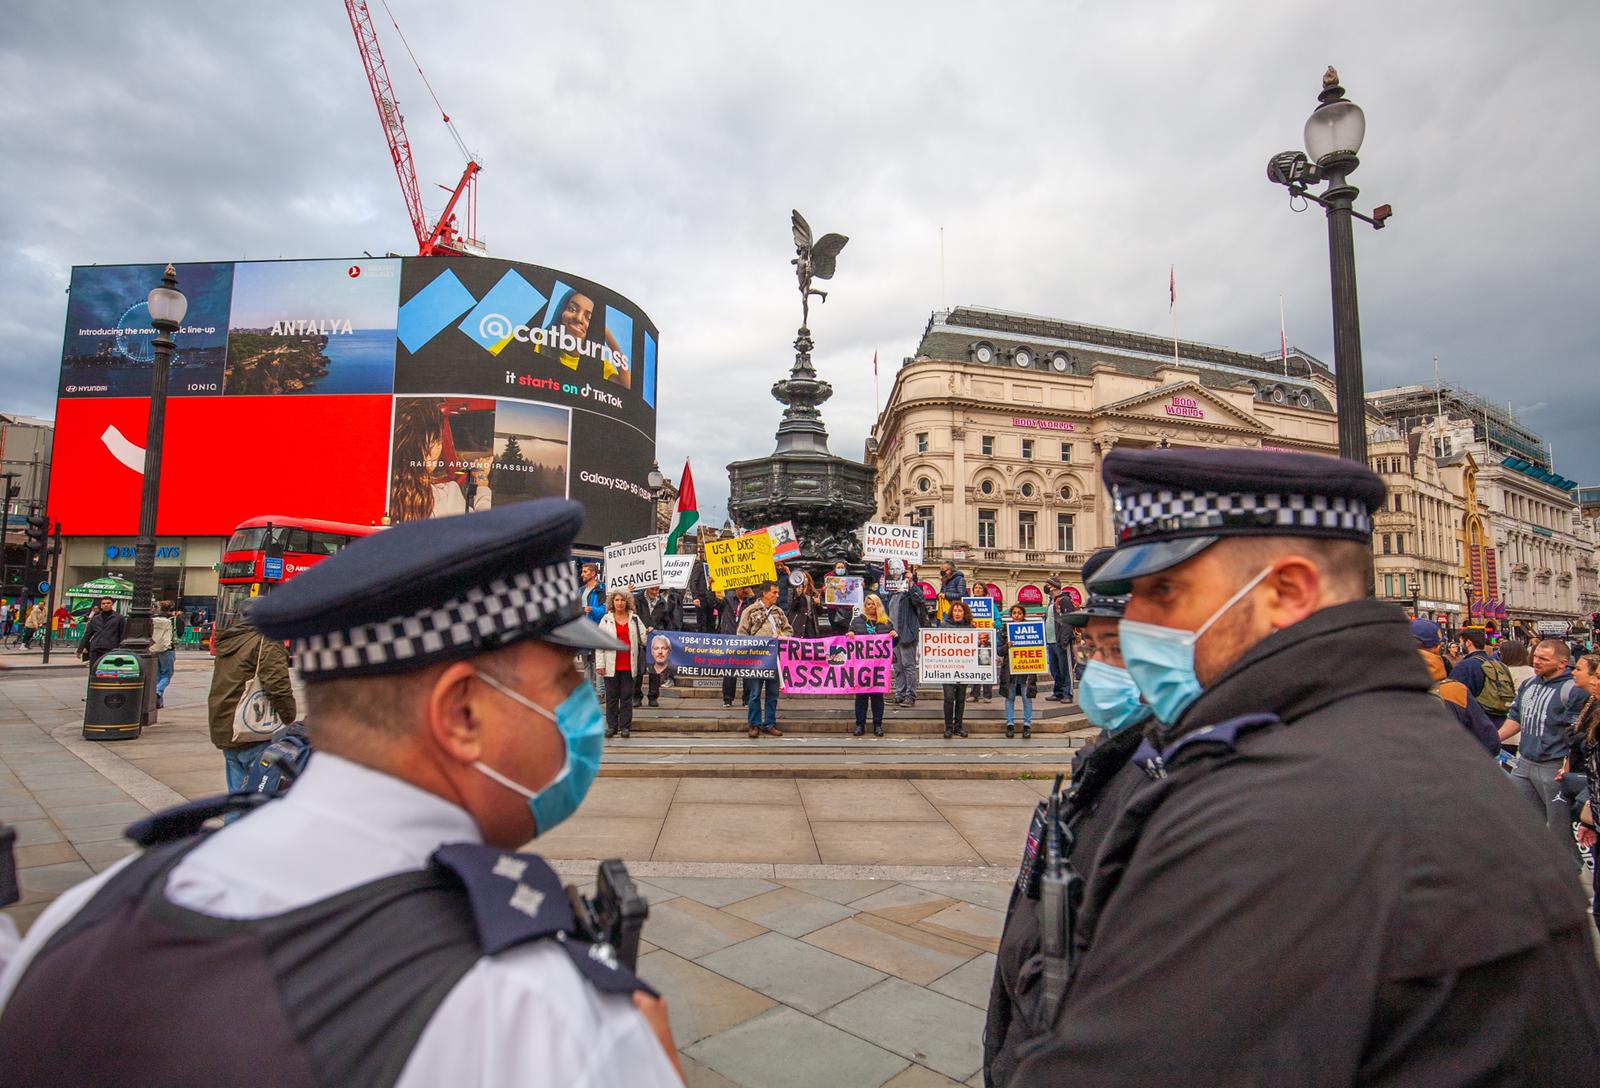 angle-of-approach-piccadilly-circus-london-3oct20.jpg